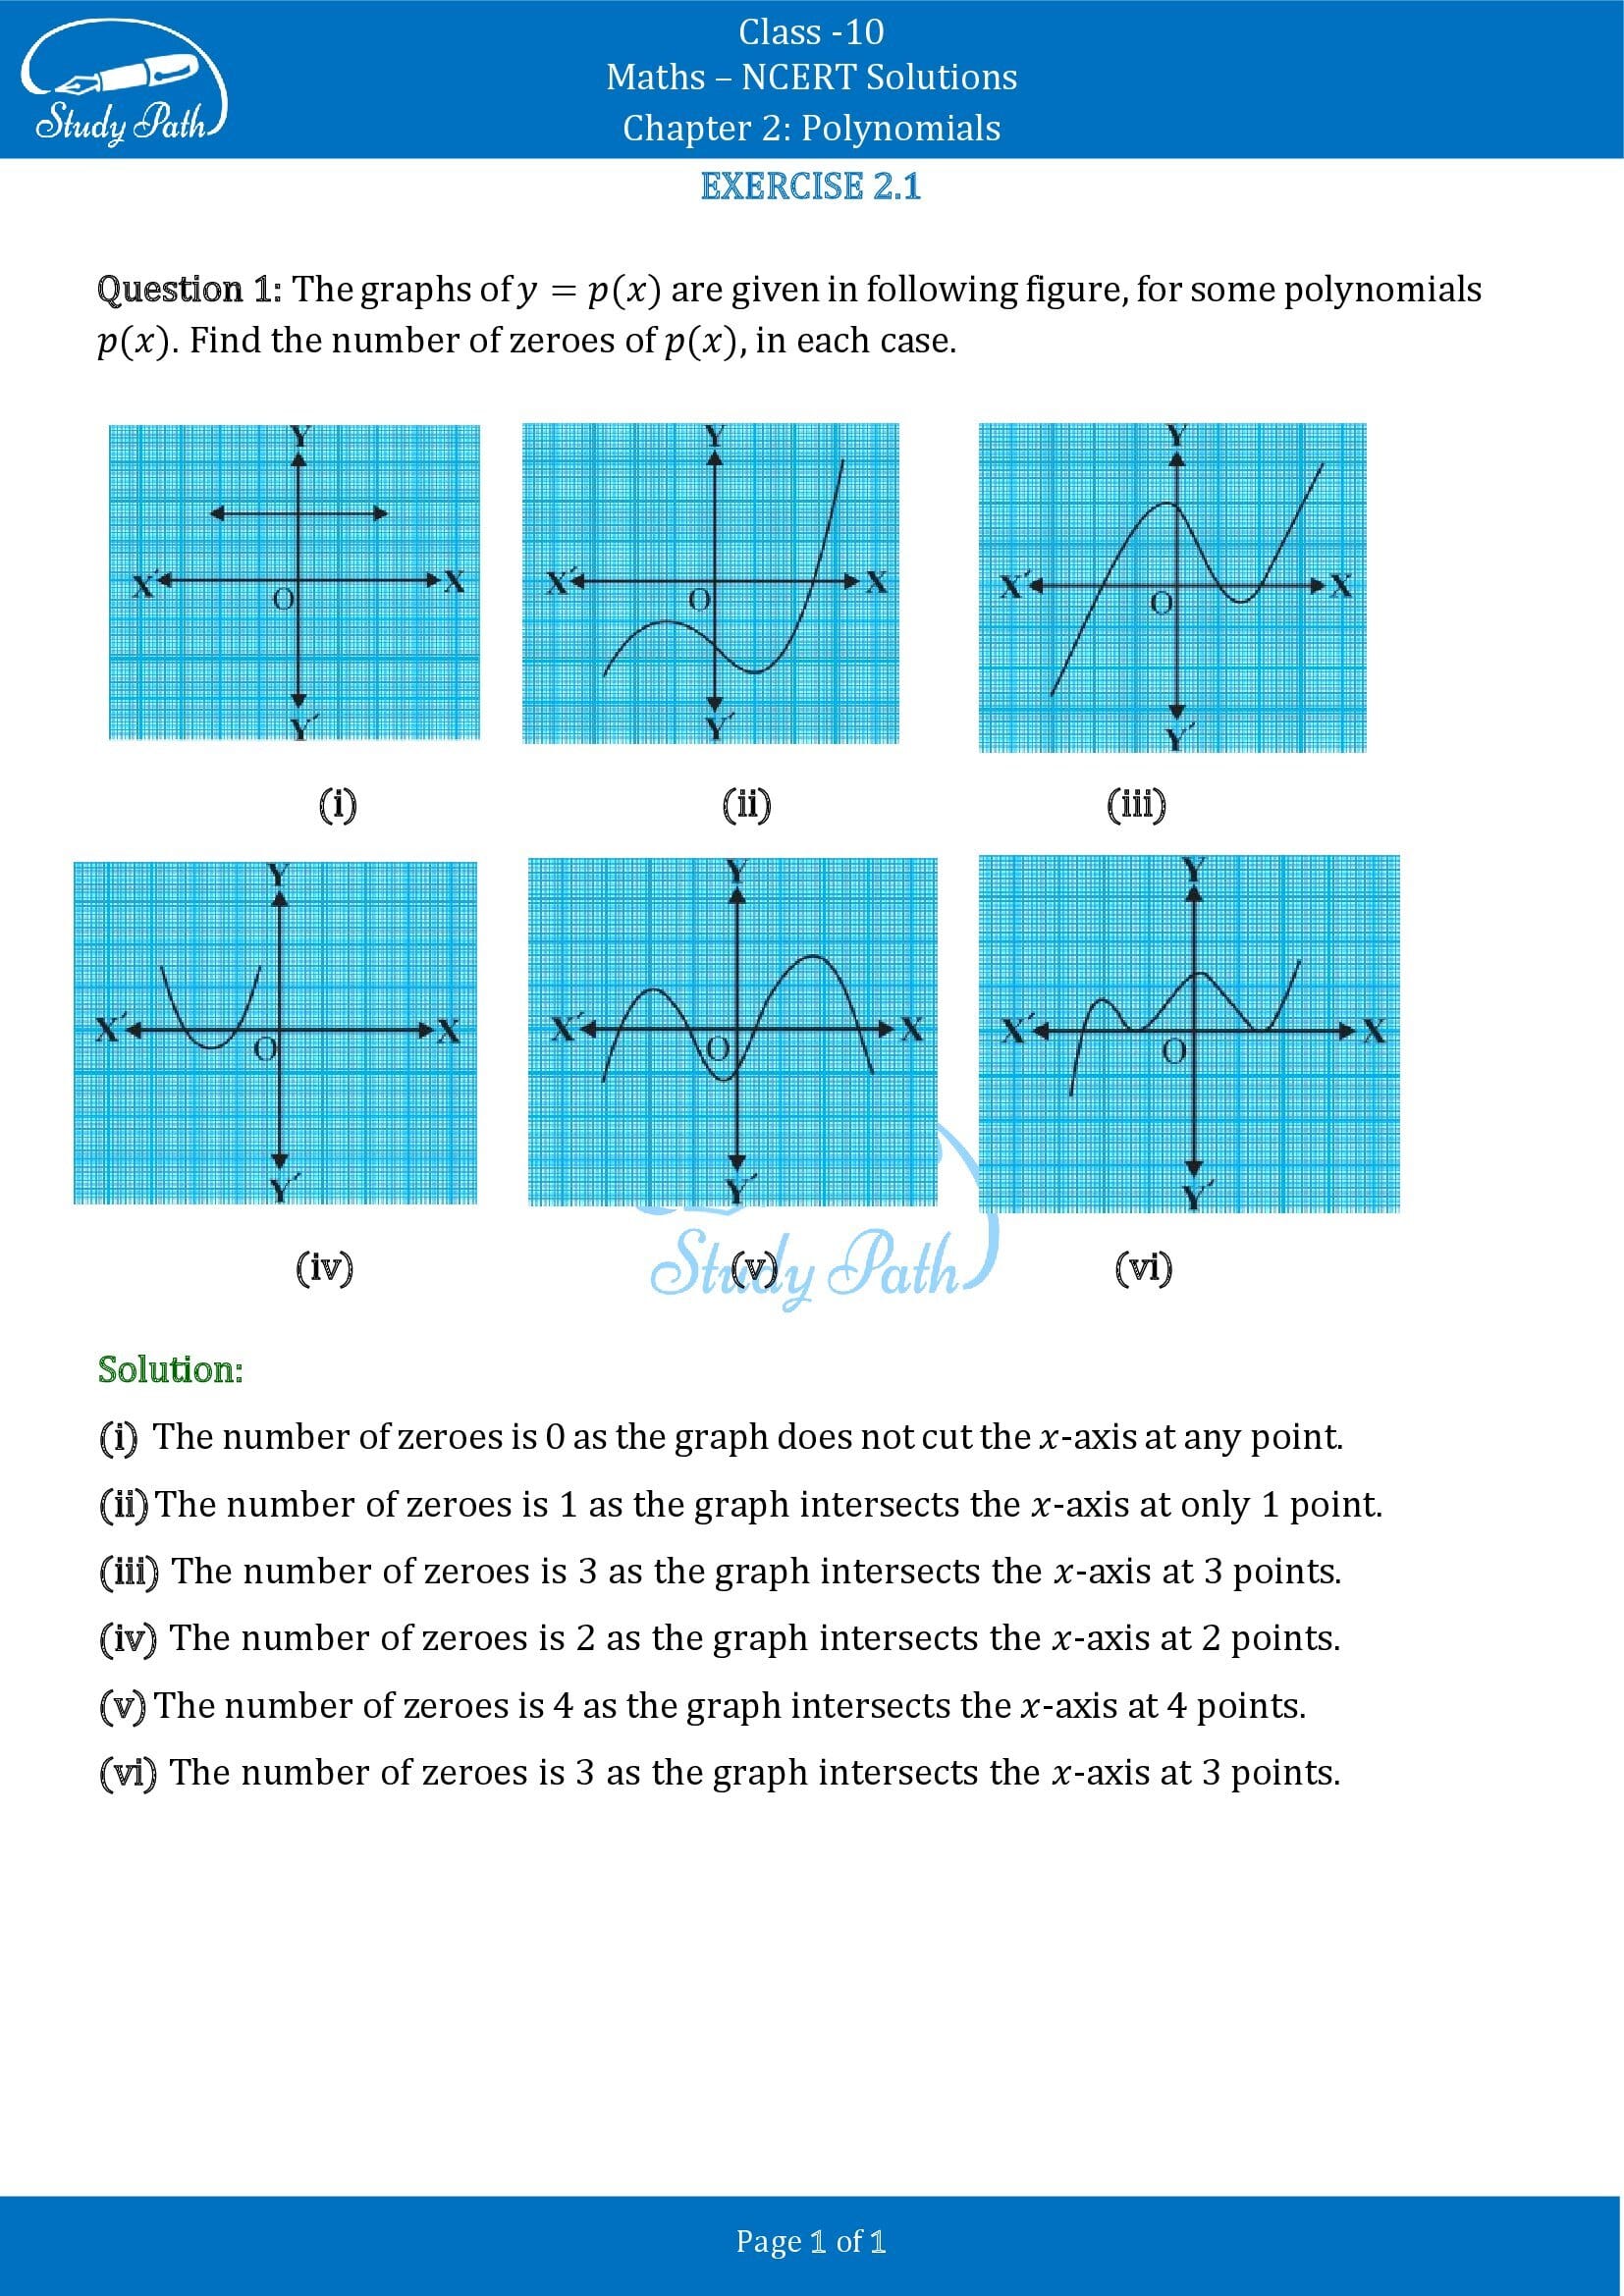 NCERT Solutions for Class 10 Maths Chapter 2 Polynomials Exercise 2.1